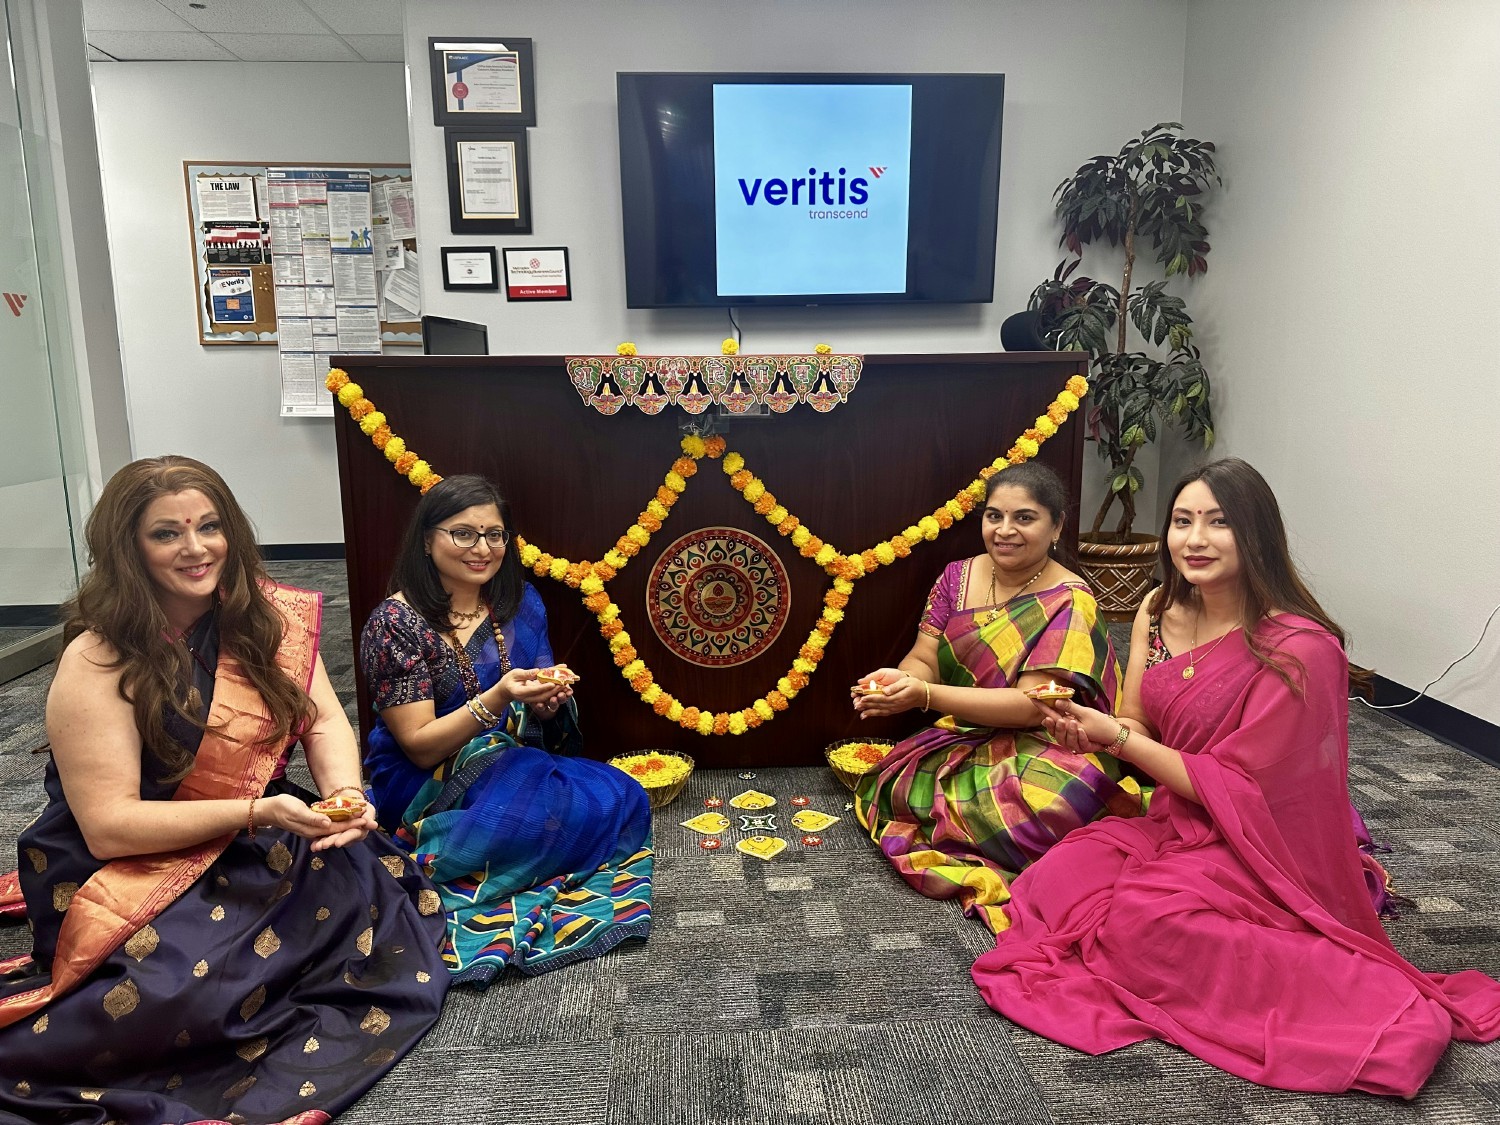 Our team came together to celebrate the festival of lights with vibrant colors, festive decor, and a sense of unity. 